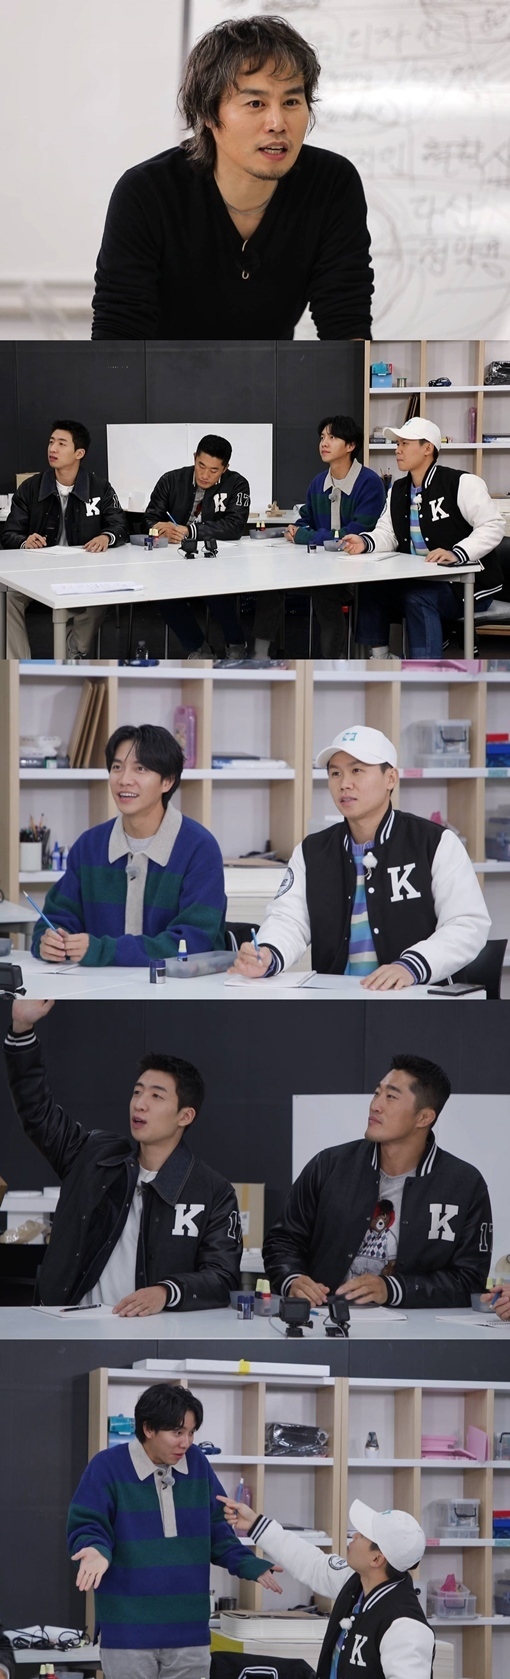 Professor Reparation, who is at the center of Korea Industrial Design, goes to master.SBS All The Butlers, which is broadcasted at 6:30 pm on January 2, will feature a professor of Club Industry Design and a professor of reparation at the center of Korea Industrial Design as president of L Company Design Center.All The Butlers Lee Seung Gi, Yang Se-hyeong, Kim Dong-Hyun and Yoo Soo-bin visited the Holy Land Club of Korea Science and Technology to meet the master.All of the members are said to have visited the Club for the first time and expressed their expectation for the day to be spent at the Club, saying, I will be here for the first time.The master reparation, which appeared, revealed that he had designed the inside of the industrial design department and visited the club with the members.All of the members were impressed by the various products designed by the master such as the toilet logo.In particular, the master said that it was requested by the state, and that it surprised the scene by first releasing the products that have not yet been marketed.Clubs personal design product tailored to the Corona city is expected to be something.In addition, the master, who was a professor at the Parsons Design School, the United States of Americas three major design schools, unveiled the unique education methods of the United States of Americas prestigious Design School.I have it and I love it The master said that he could teach with only two Re-Ments, and the members were told that they had made two Re-Ments in all kinds of situations and made the scene laugh.The master explained, In United States of America, I was a Desiigner who made pretty garbage, and explained the design of sharing with the philosophy of the master and the design of living together.The members are also deeply sympathetic to the philosophy of the master and thought.The design philosophy of the master really attracts attention to what kind of impressions he would have given to the members.